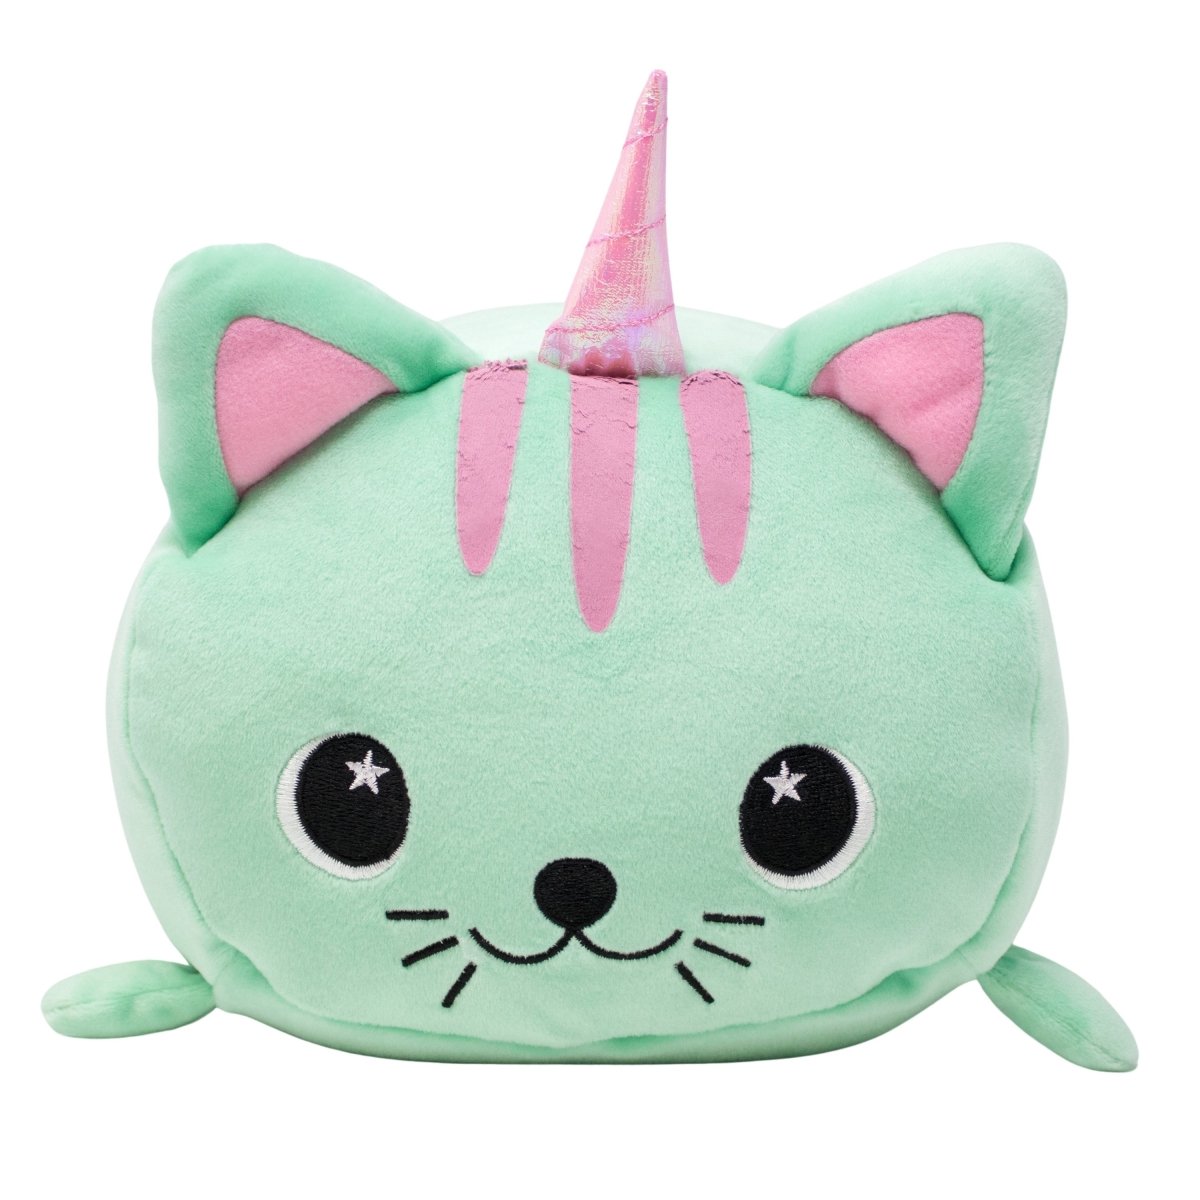 Mint Green Caticorn Stuffed Animal with Pink Horn and Ears